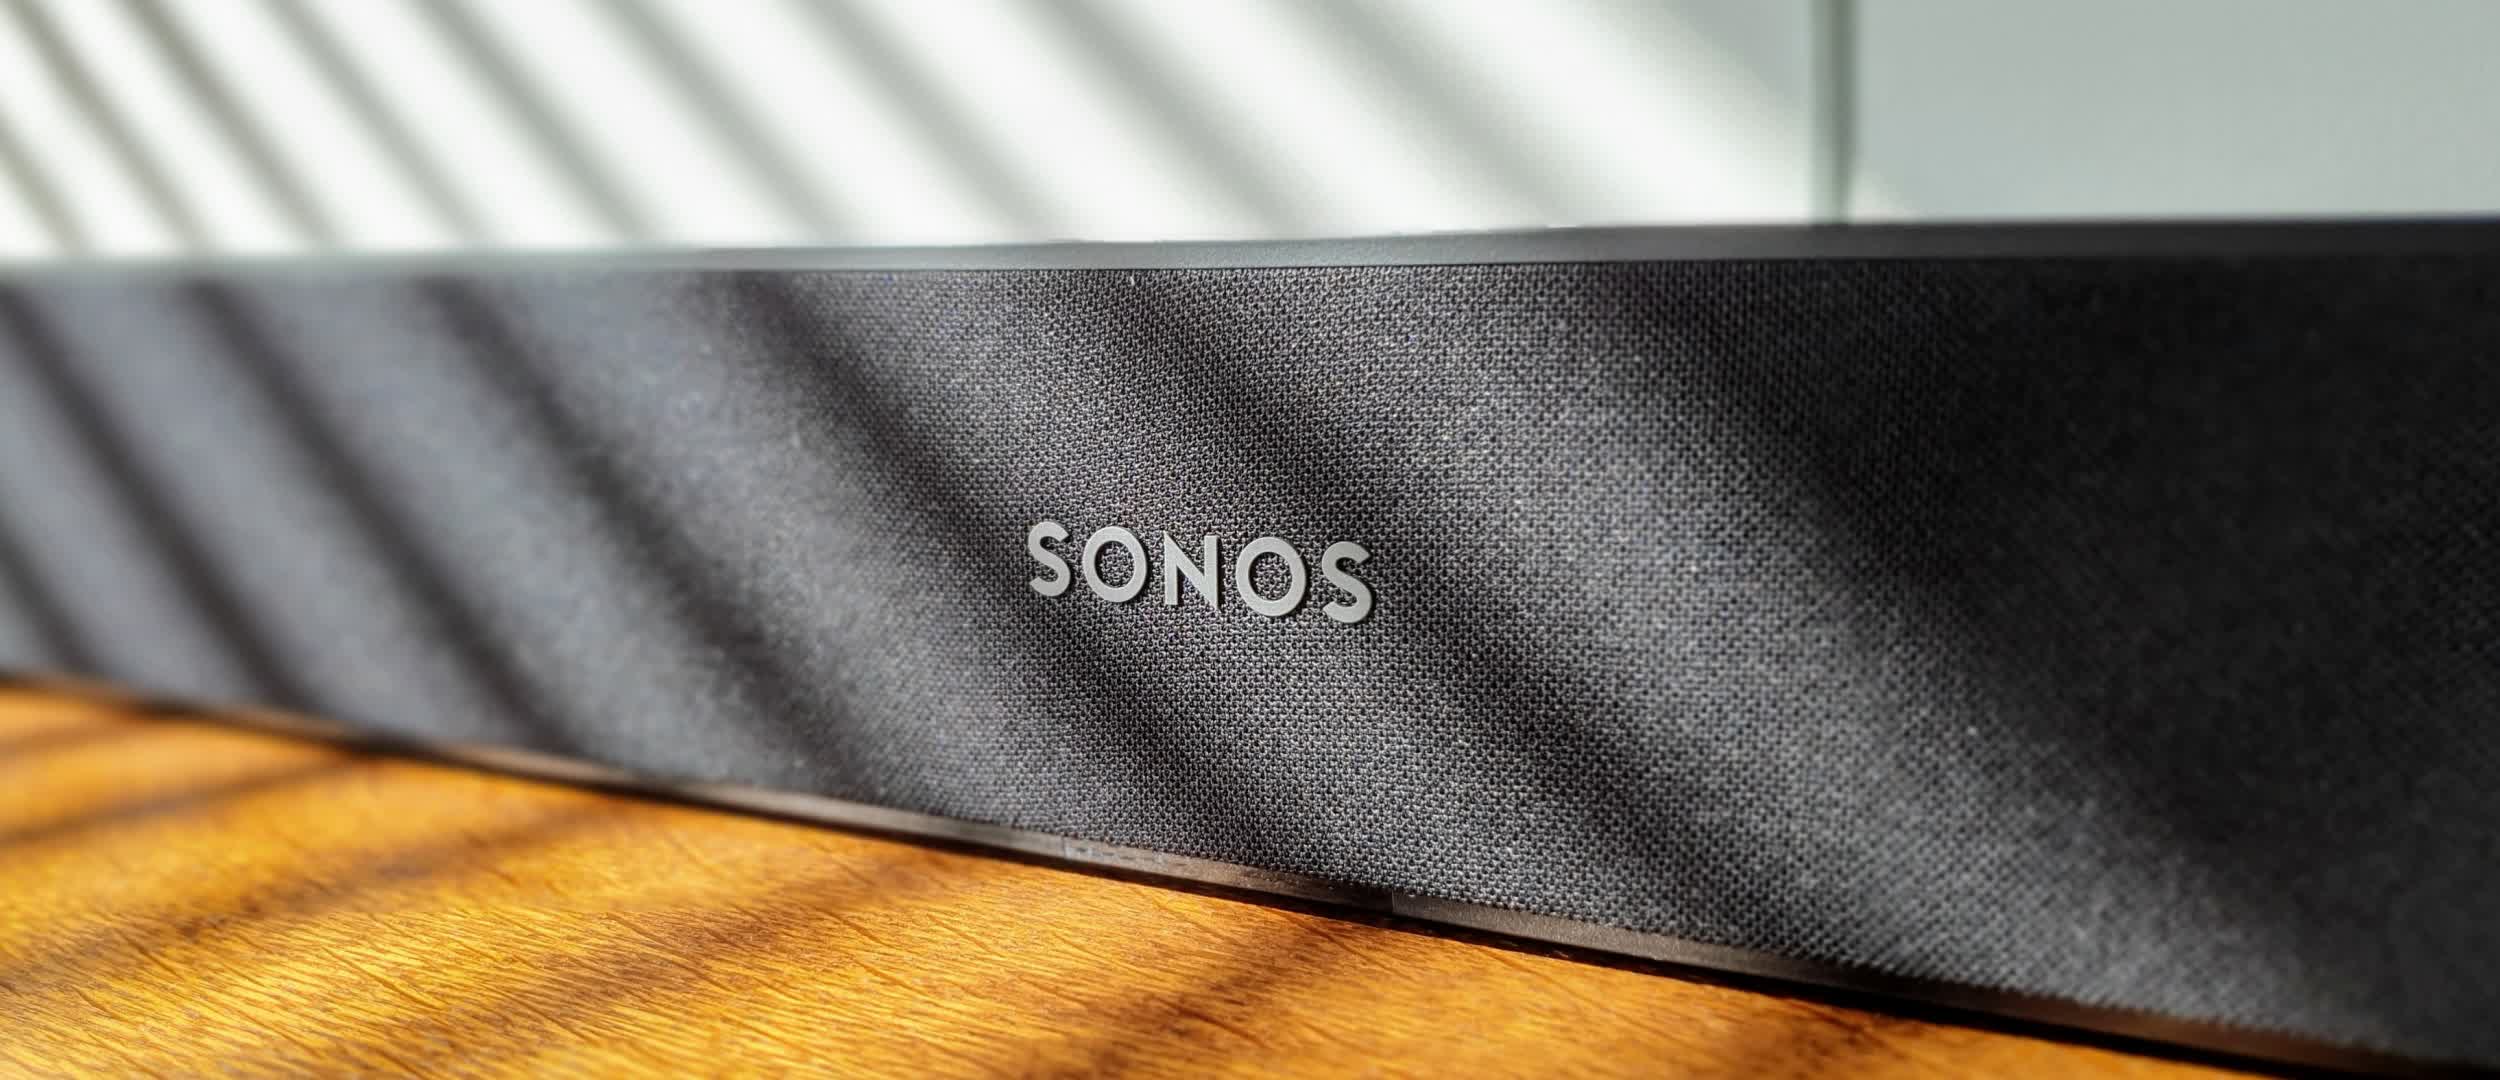 Sonos to launch budget-friendly soundbar in the coming weeks